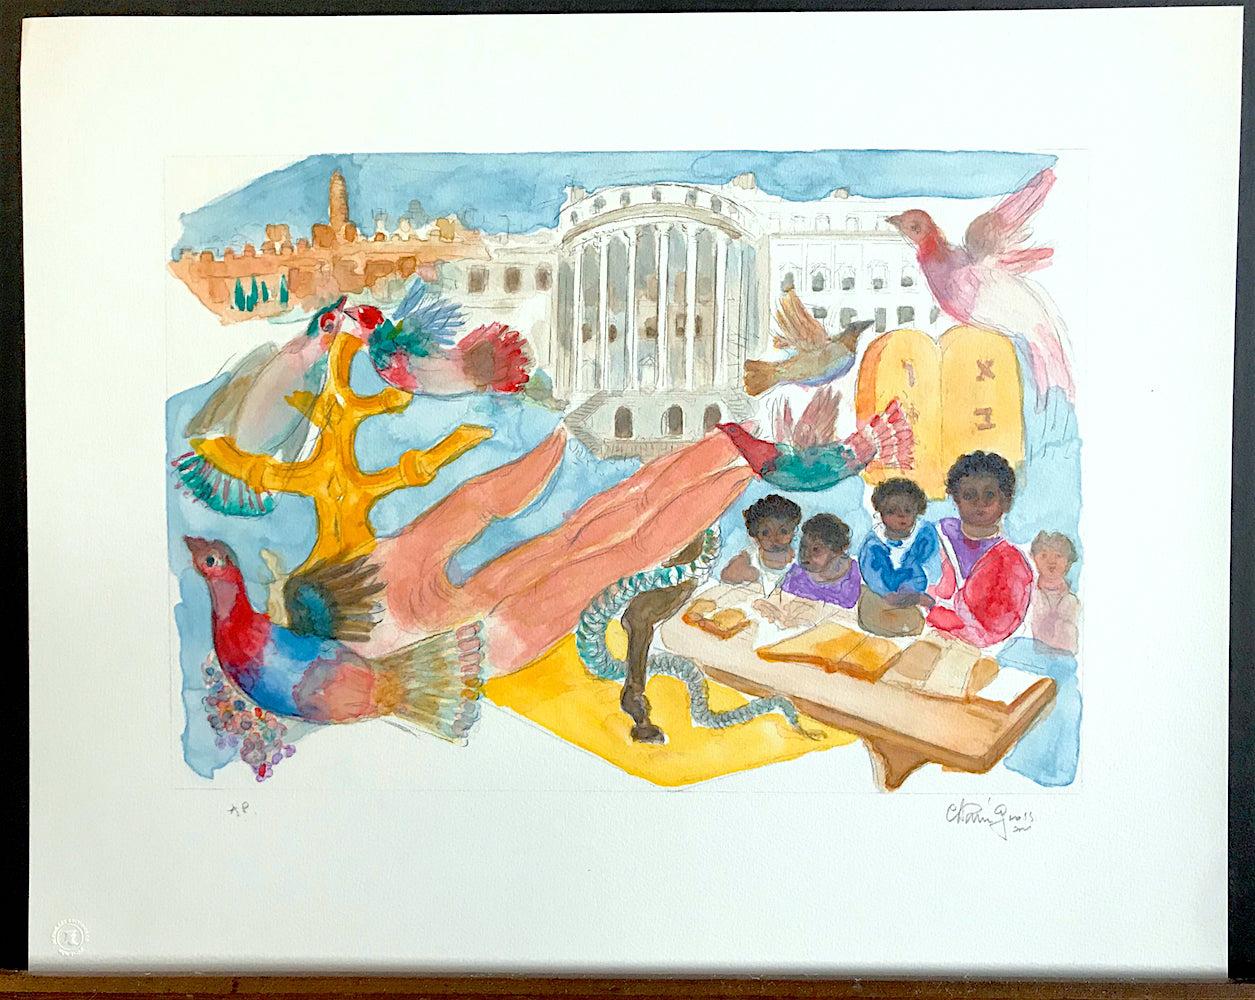 OPERATION MOSES Signed Lithograph, Historic 1984 Airlift Ethiopian Falasha Jews - Contemporary Print by Chaim Gross